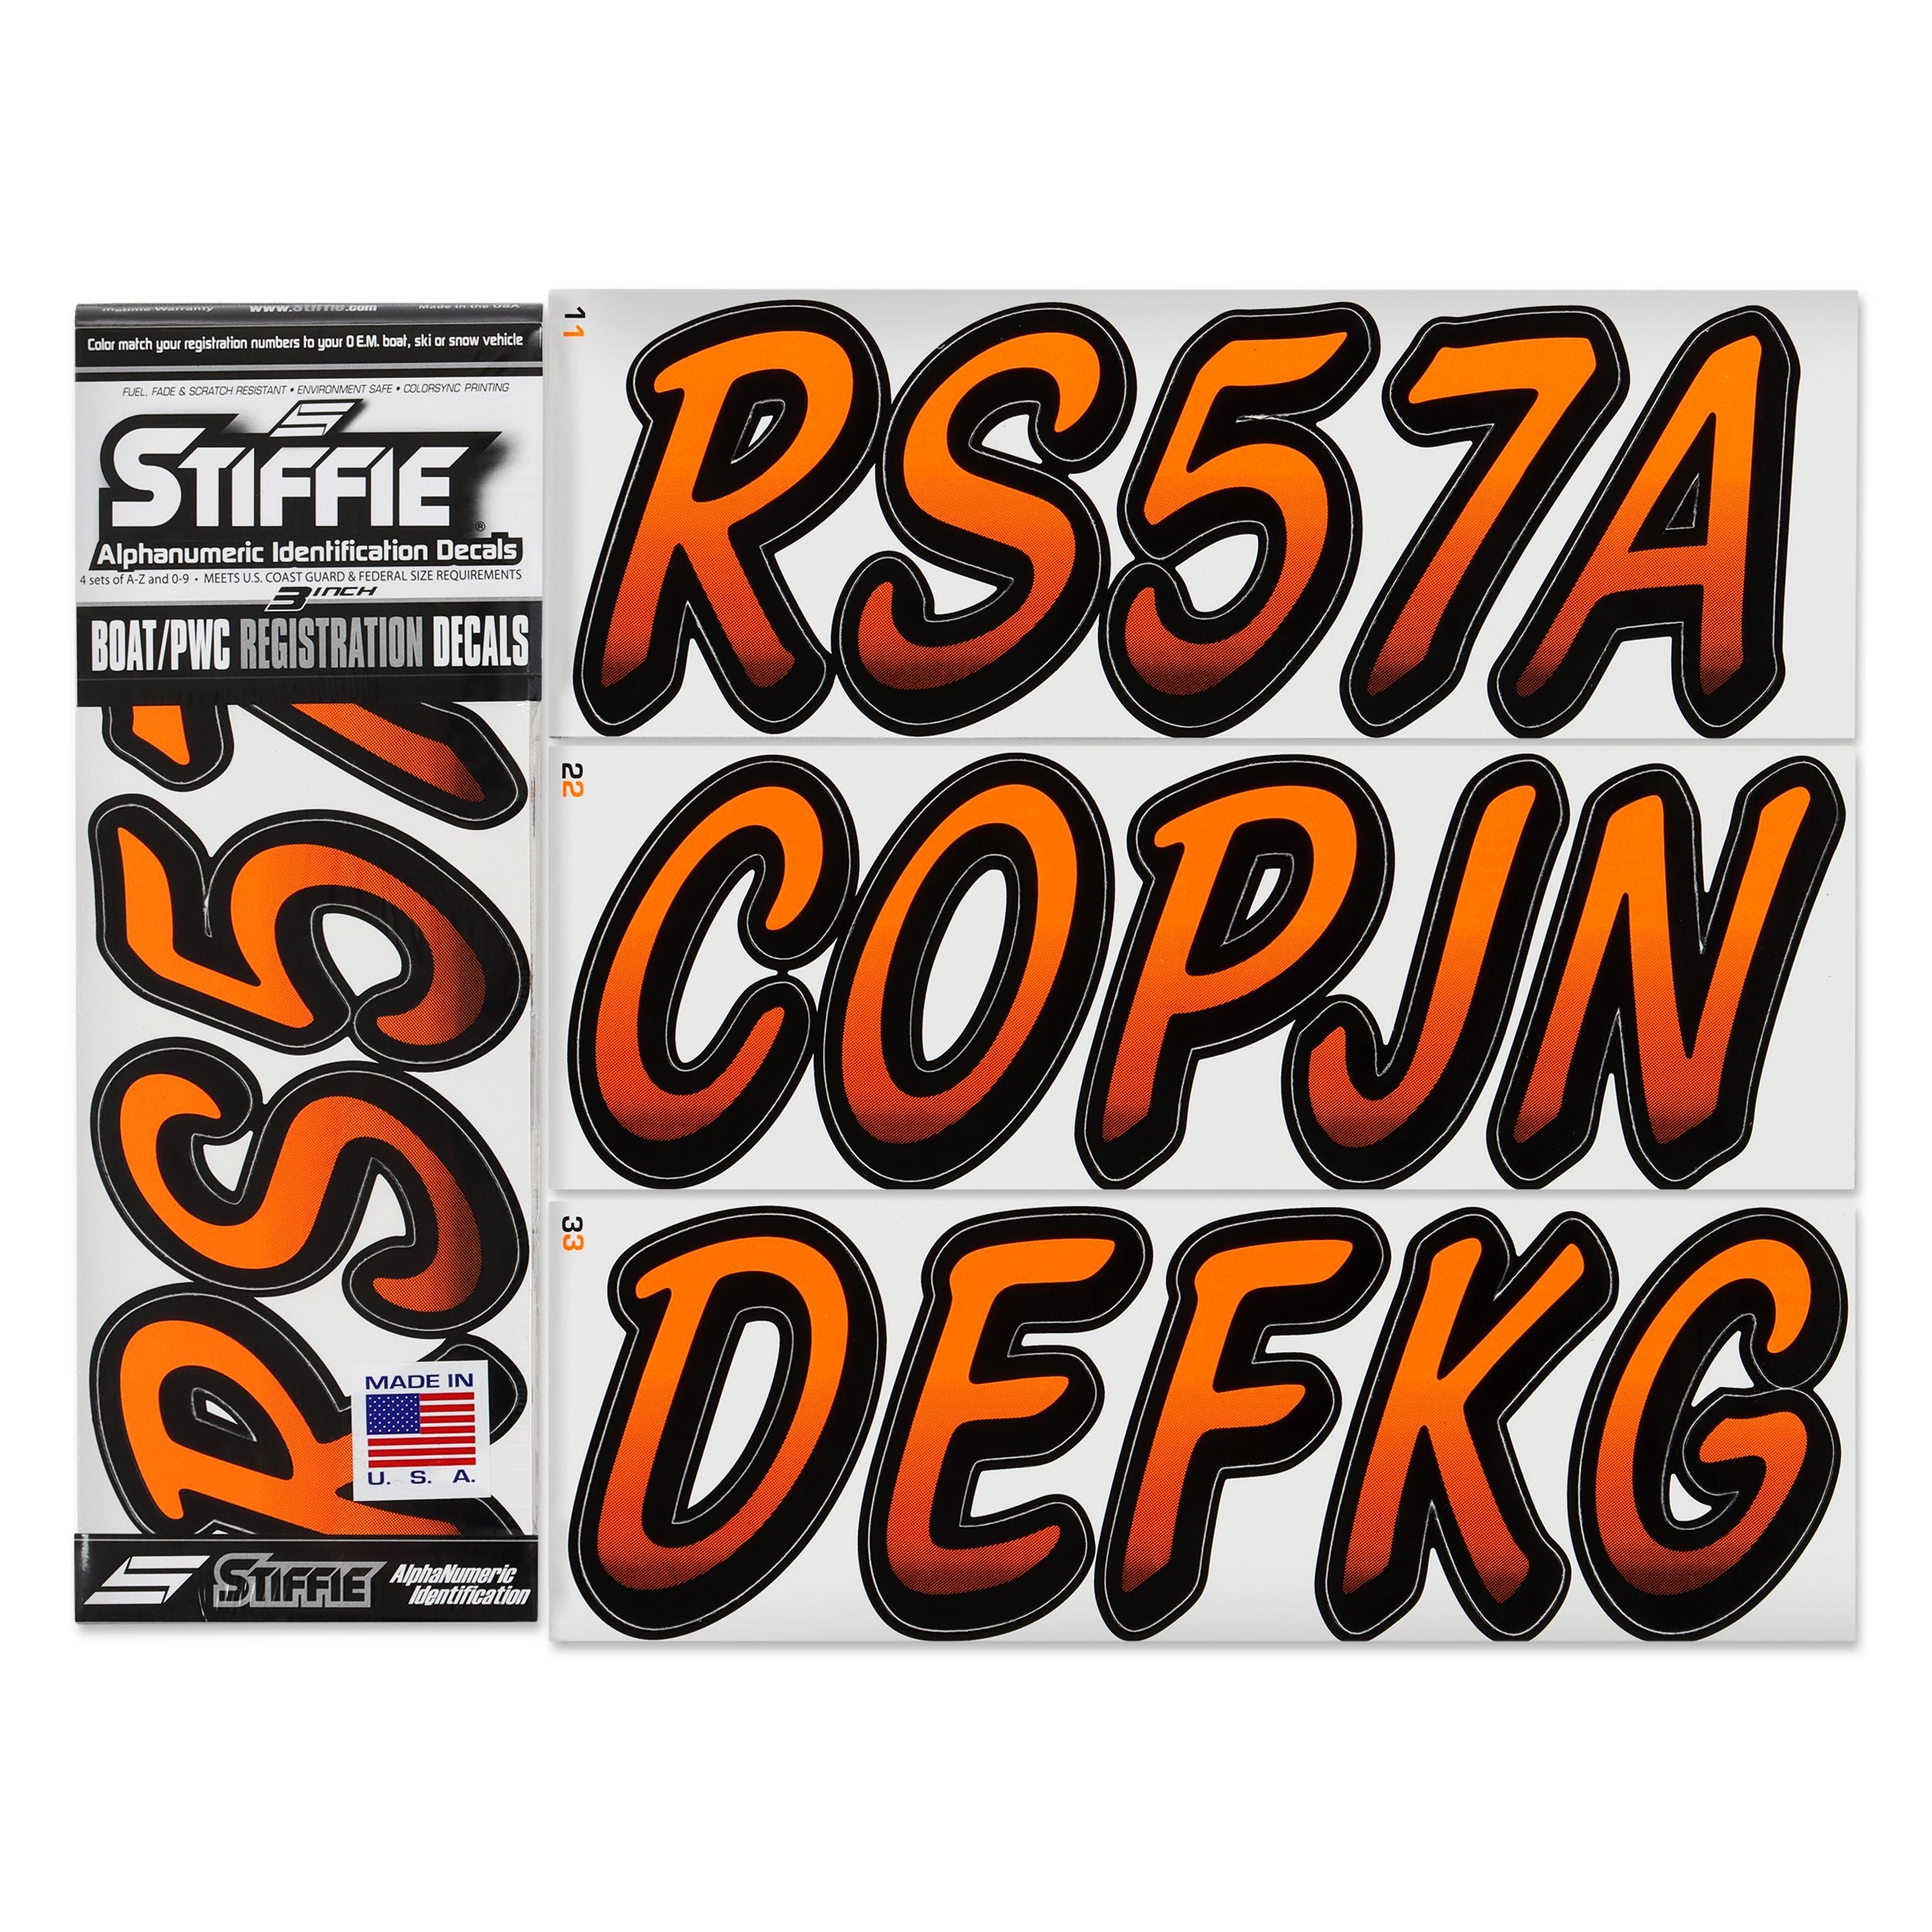 STIFFIE Whipline Electric Orange/Black 3" Alpha-Numeric Registration Identification Numbers Stickers Decals for Boats & Personal Watercraft